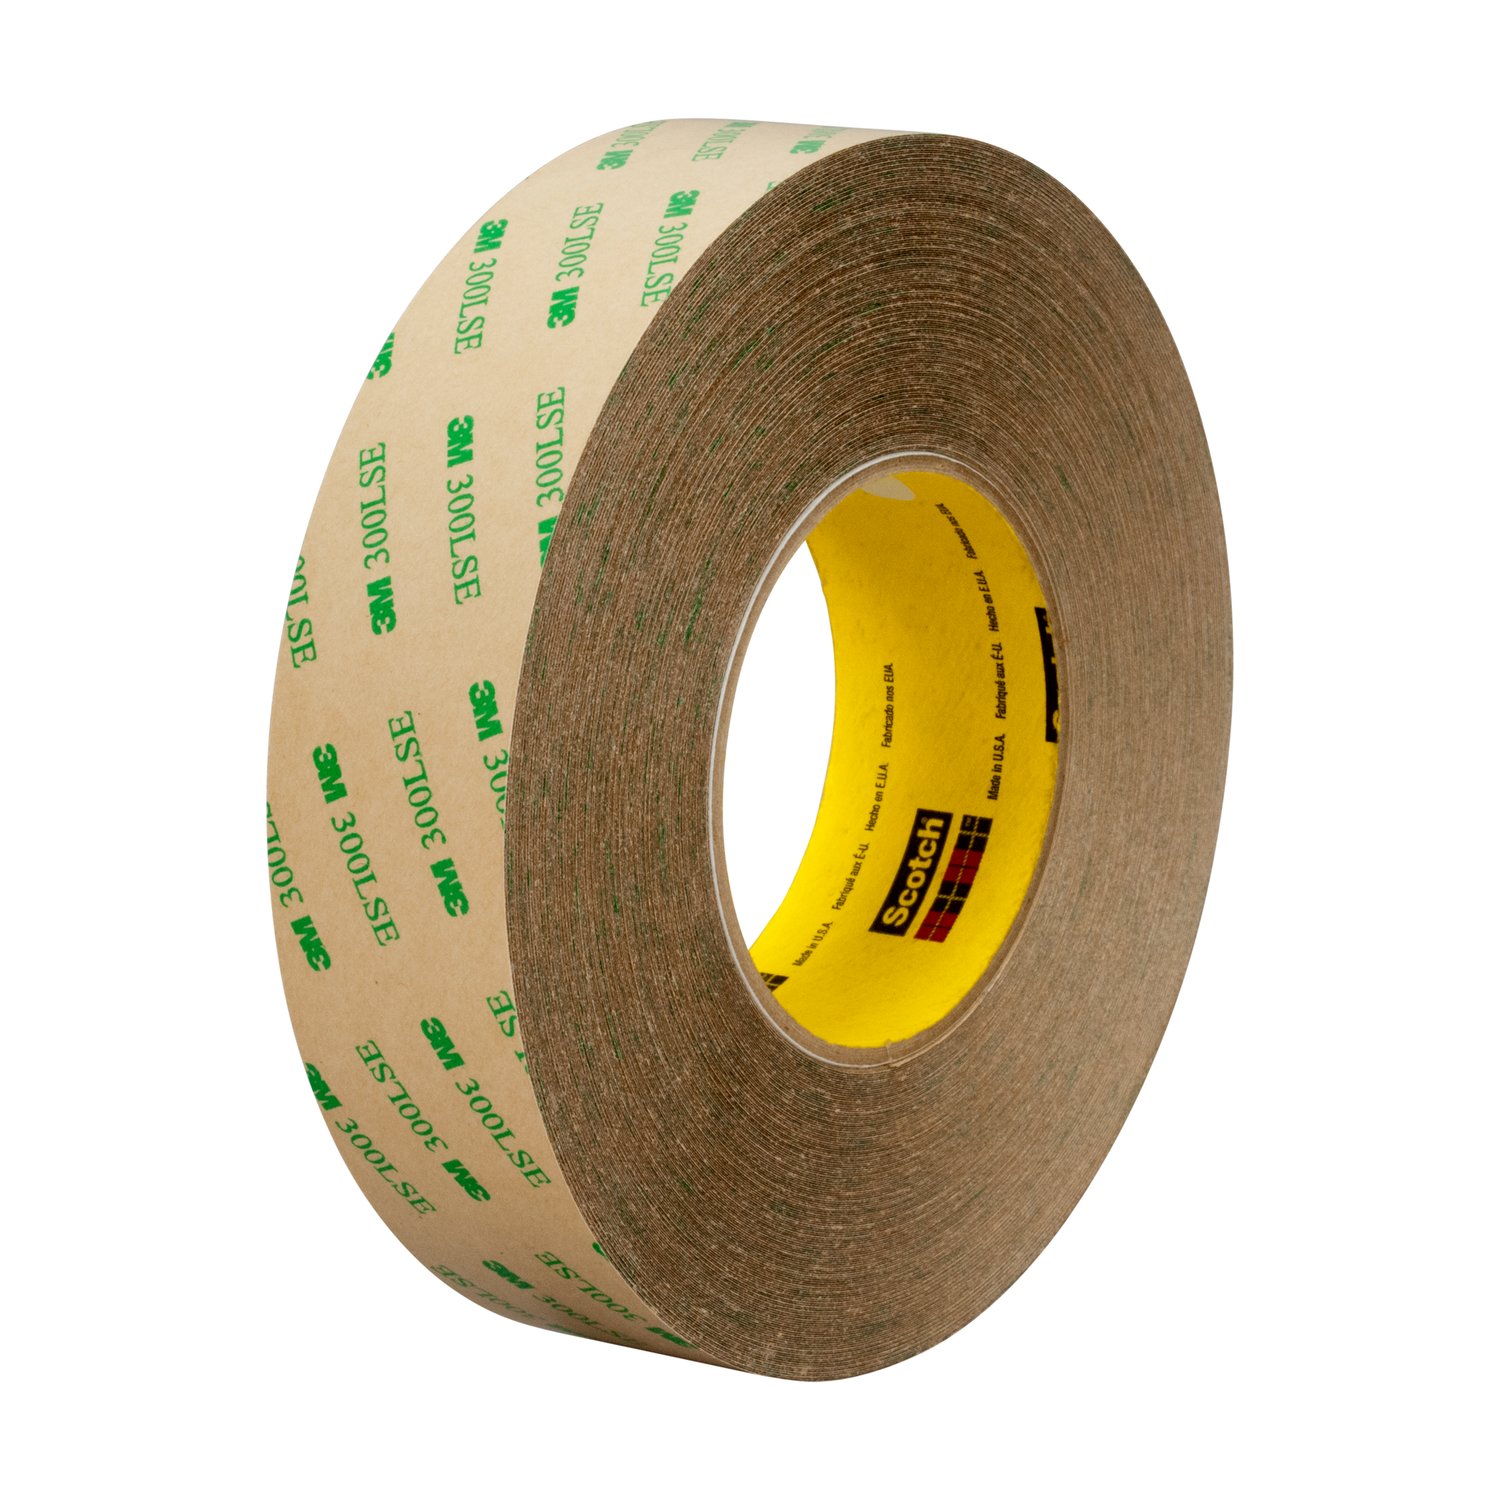 7010335197 - 3M Adhesive Transfer Tape 9672LE, Clear, 48 in x 180 yd, 5 mil, 1 roll
per case